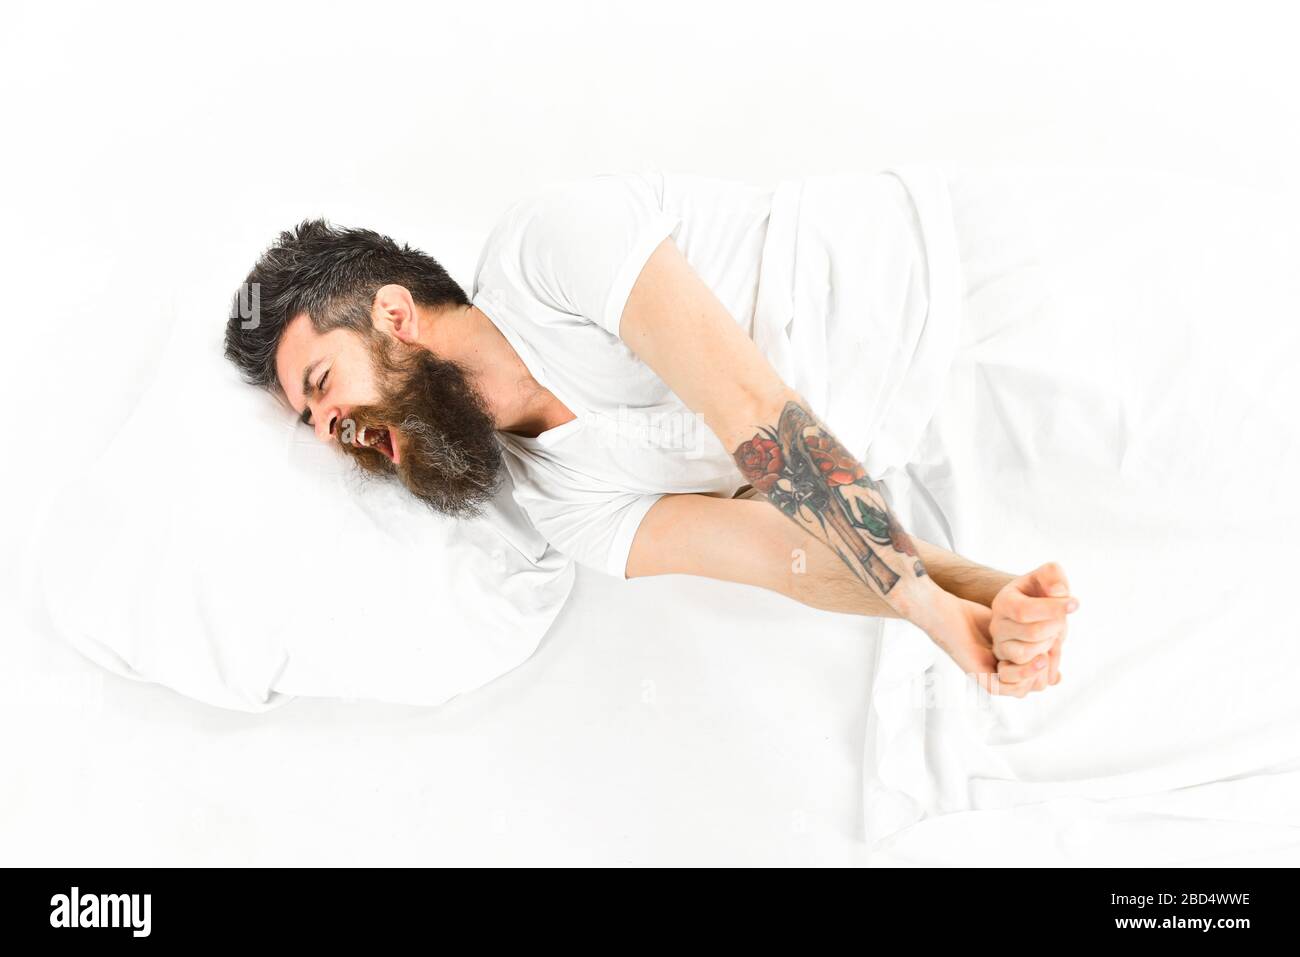 Man with sleepy yawning face stretching while lay in bed, wake up. Man slept well, white background. Good morning concept. Hipster with beard stretching arms, drowsy, sleepy macho, top view. Stock Photo